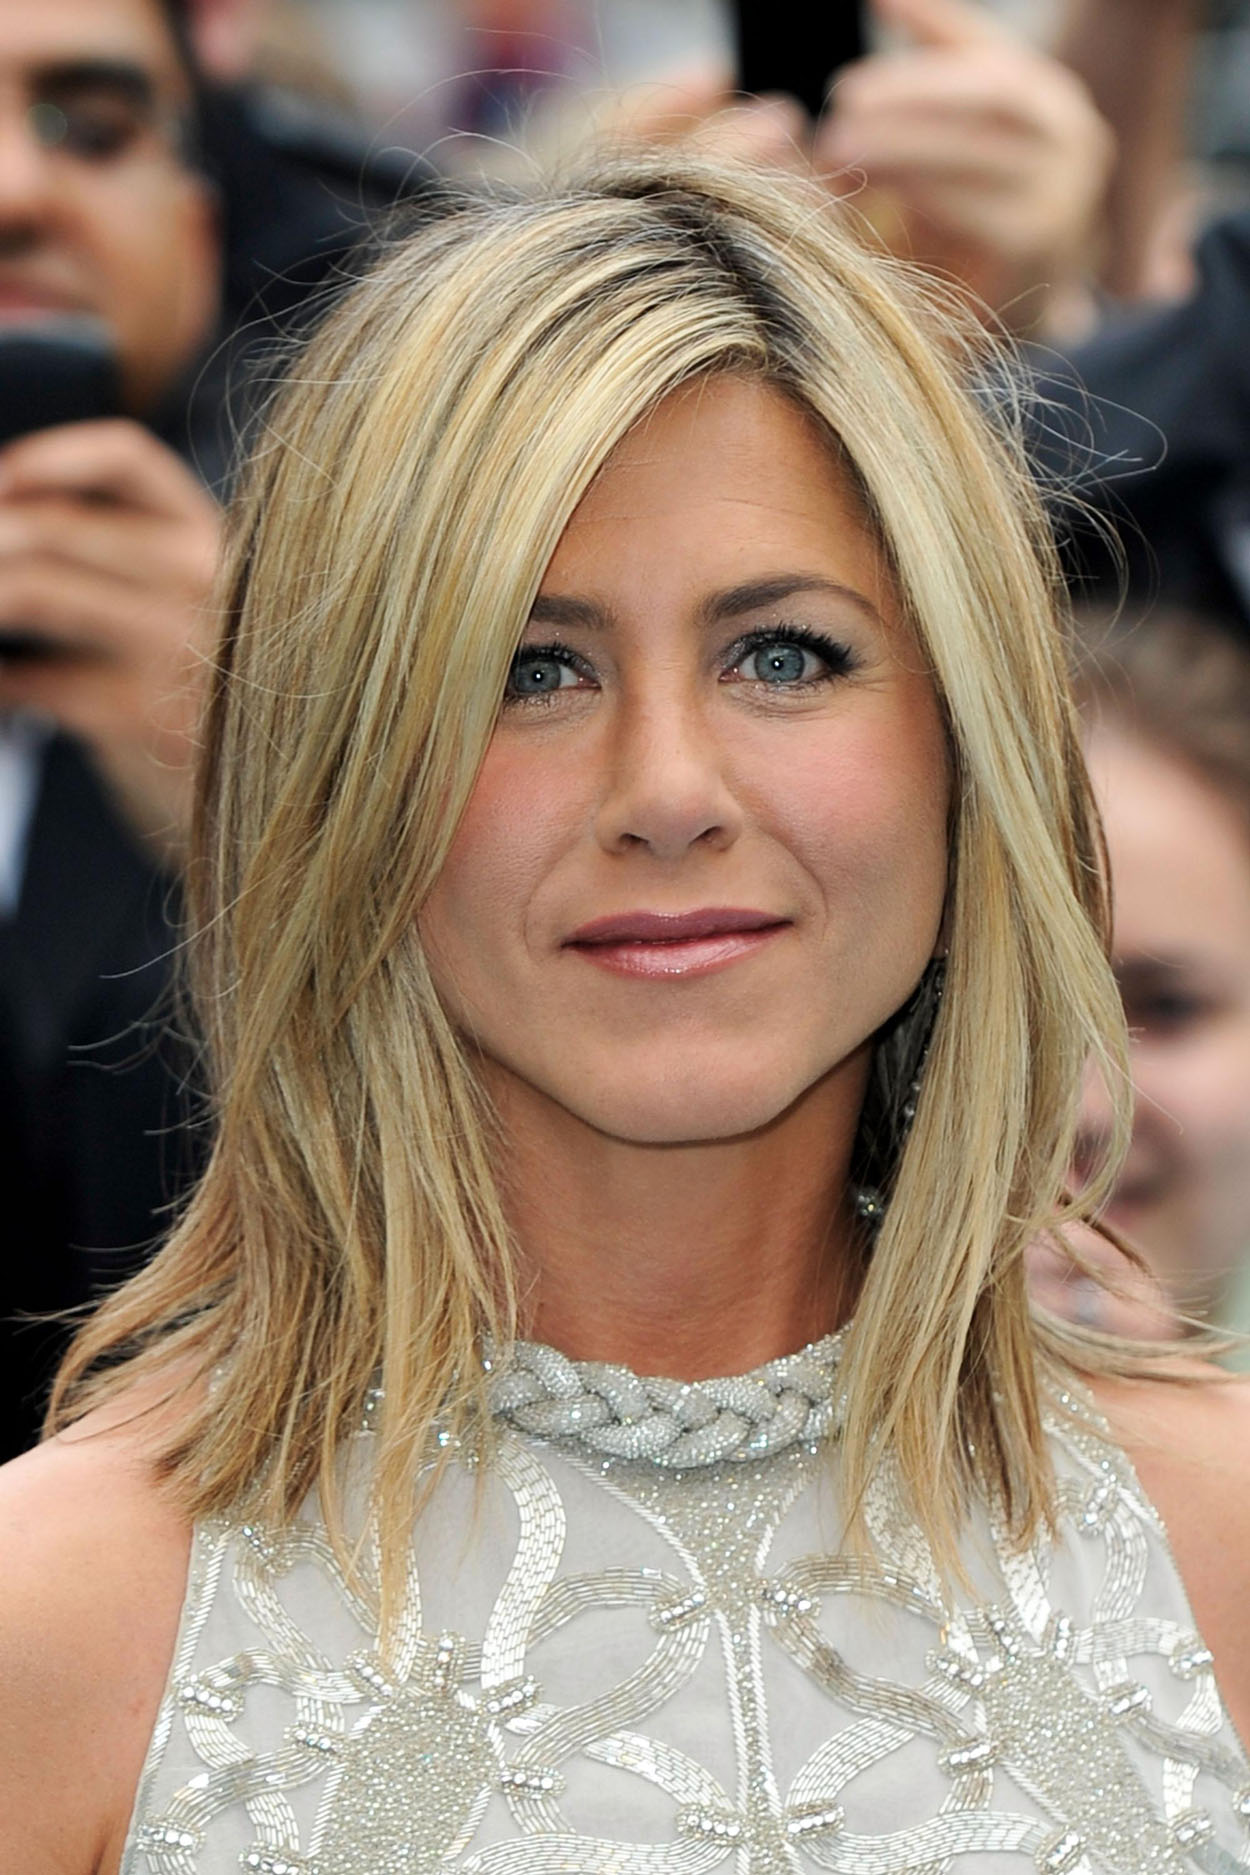 Jennifer Aniston attend the UK premiere of the movie Horrible Bosses at BFI Southbank on 20th July 2011